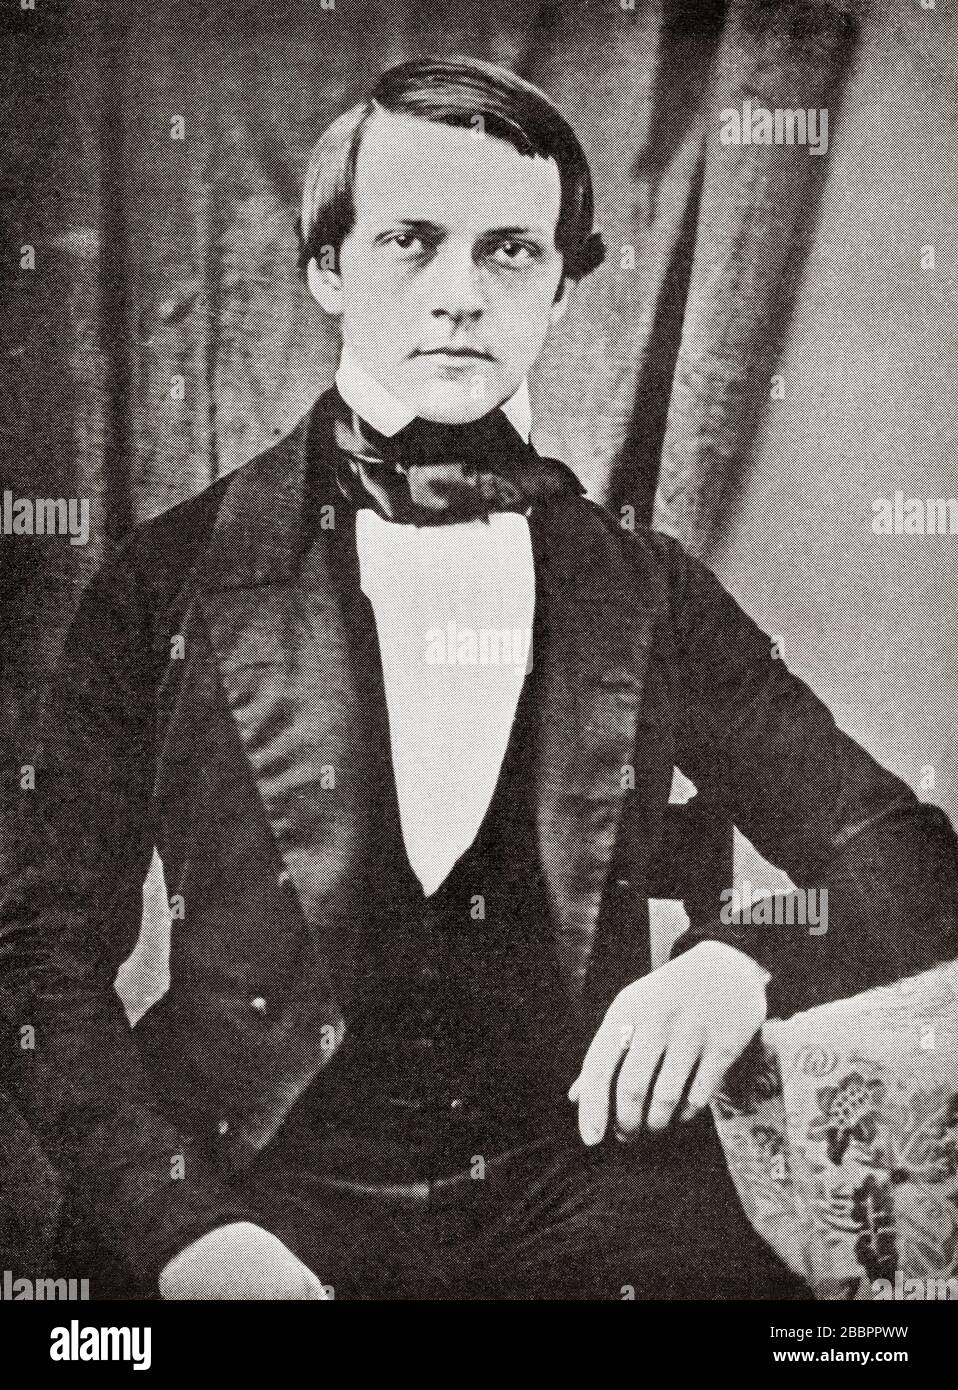 Hermann Ludwig Ferdinand von Helmholtz, 1821 – 1894.  German physician and physicist.  From Selected Readings in the History of Physiology, published 1930. Stock Photo